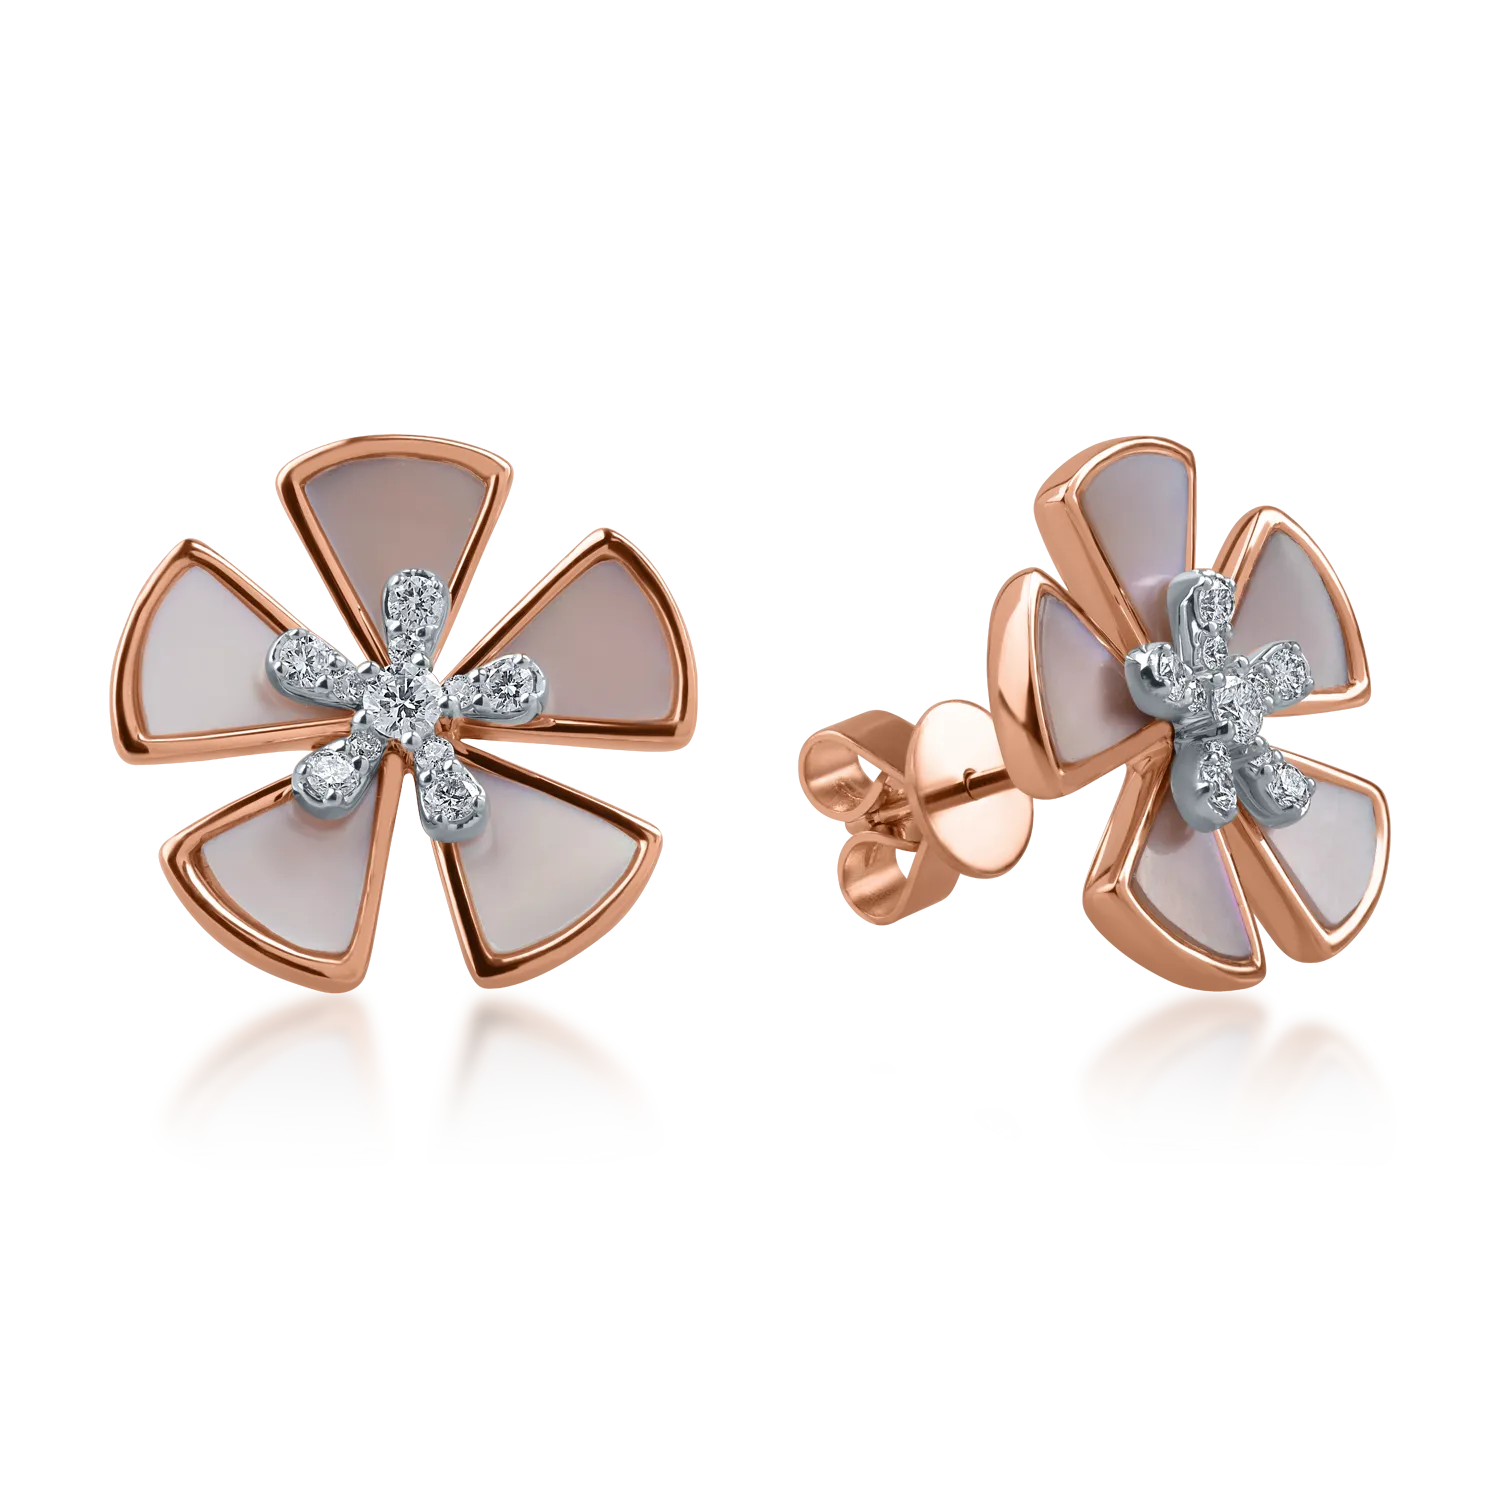 Rose gold flower earrings with 2.89ct mother of pearl and 0.282ct diamonds